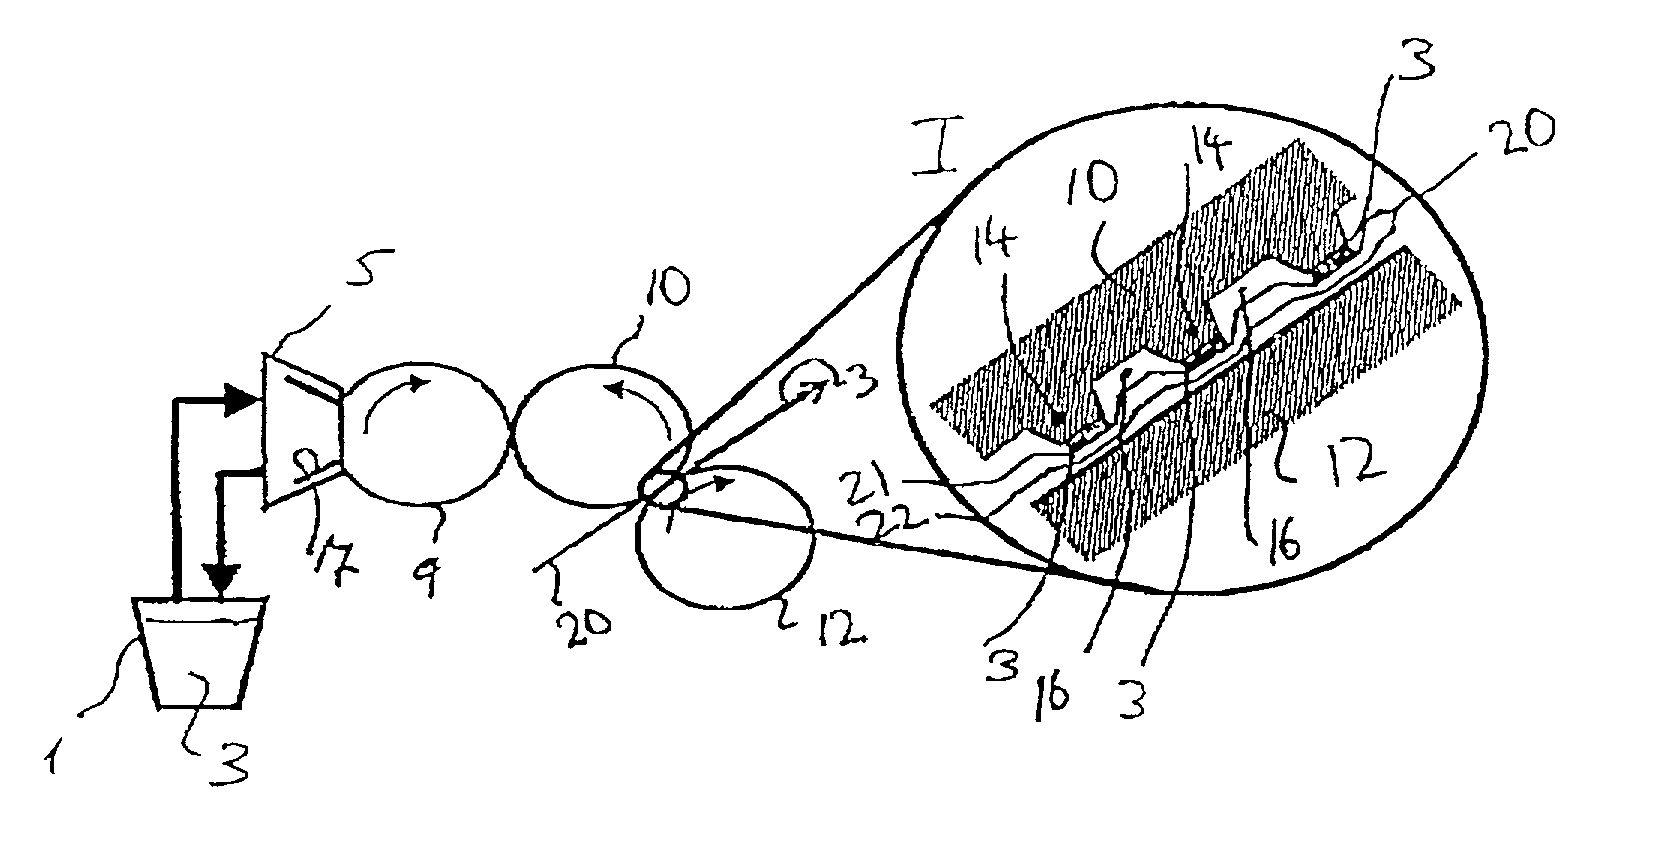 Method of and apparatus for producing a printed ink pattern on a tissue product, as well as a printed tissue product as such